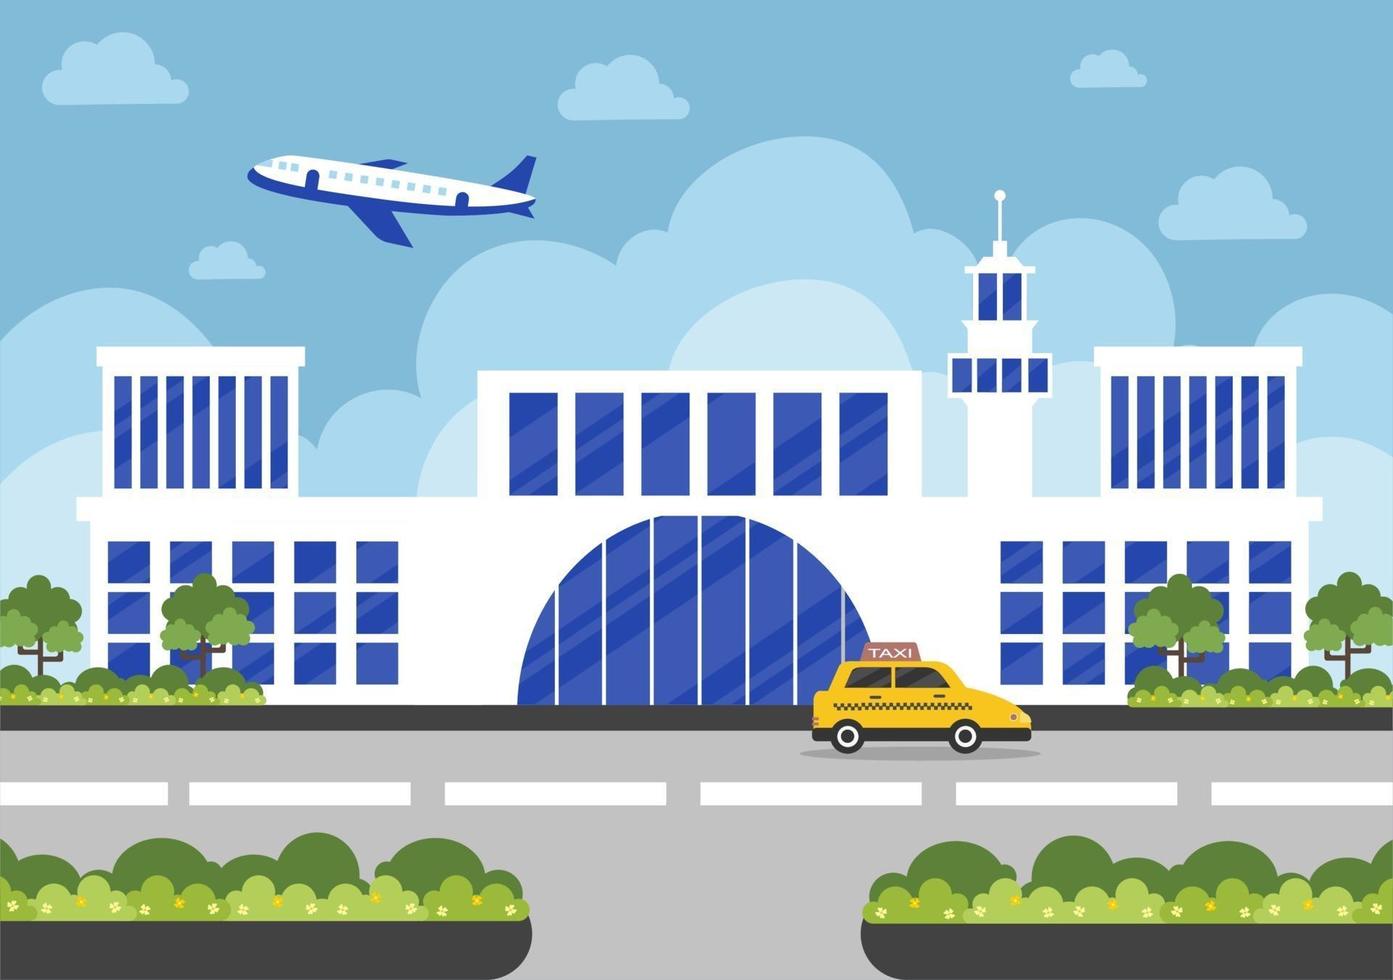 Airport Terminal Building with Infographic Aircraft Taking off vector